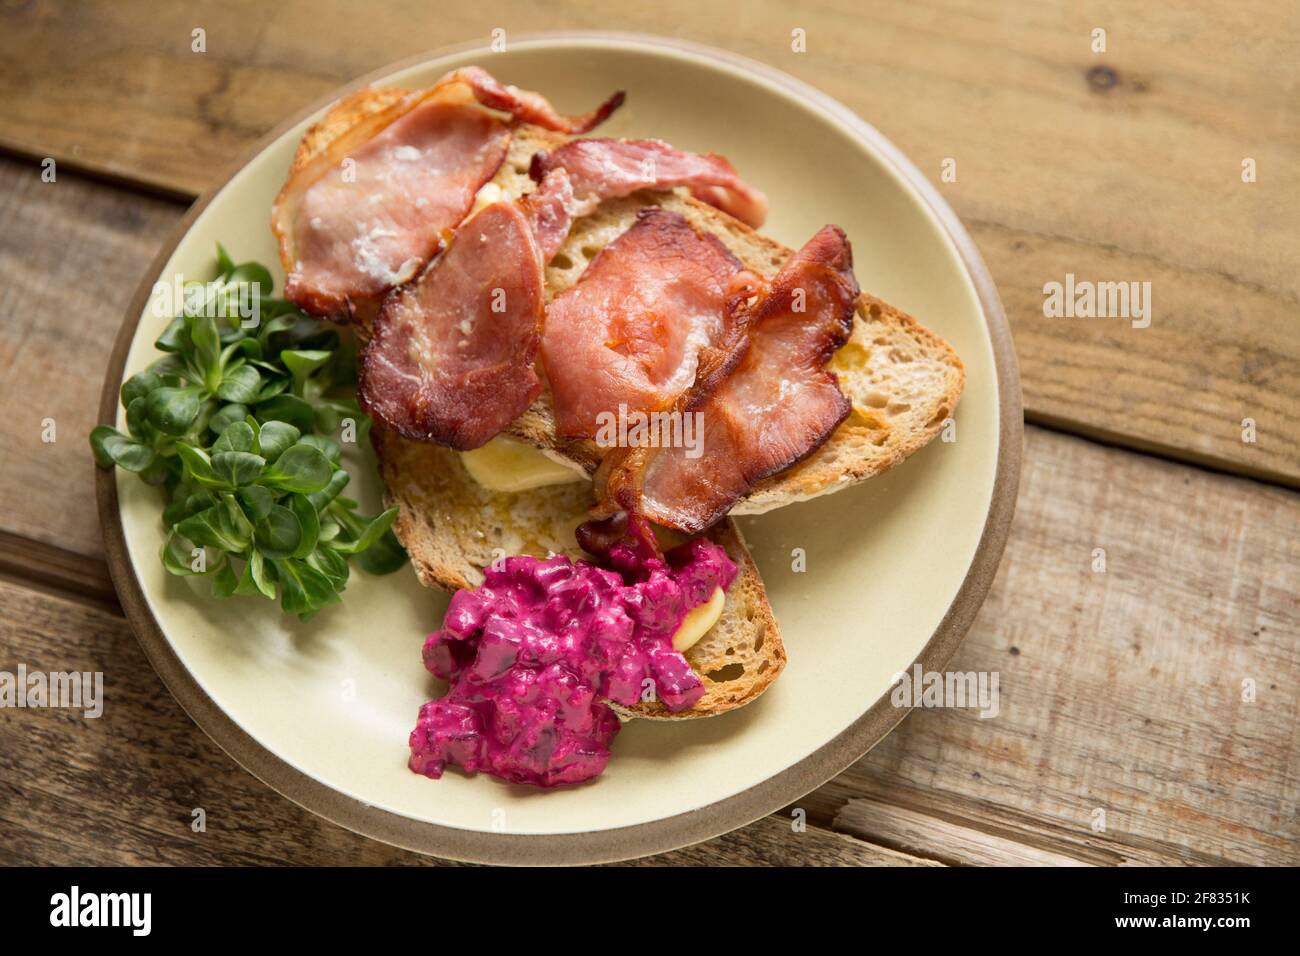 Rashers of smoked back bacon that has been grilled and served on toasted sourdough bread with lambs lettuce and a horseradish and beetroot dressing. T Stock Photo